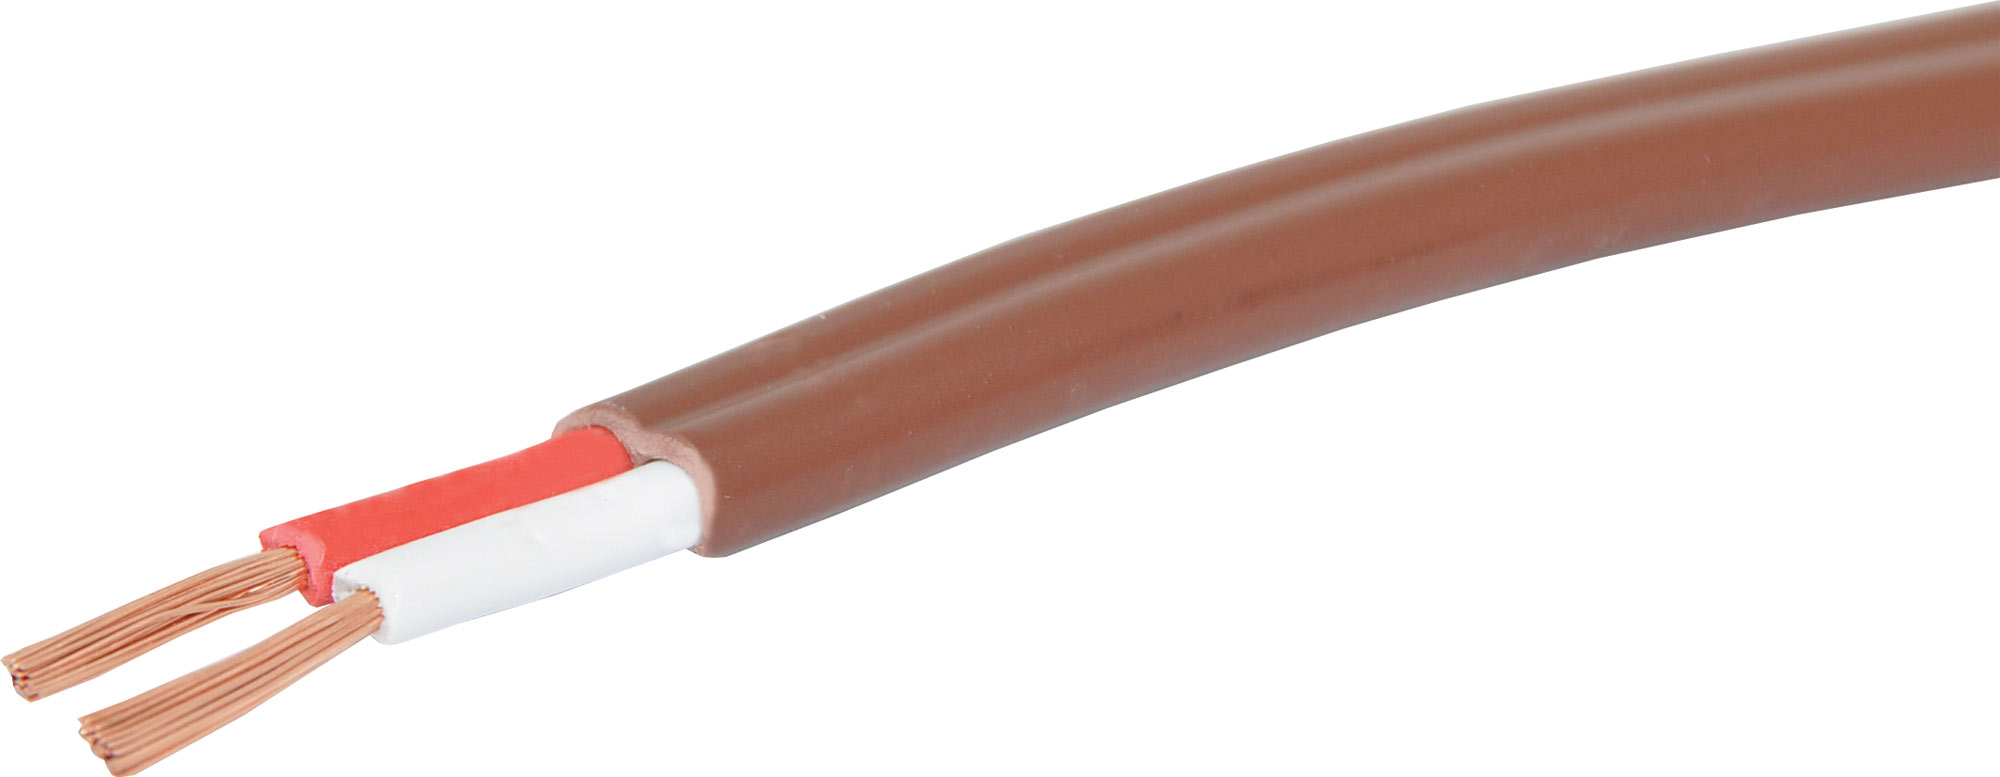 FIG8 CABLE 24/0.20 2 CORE UNSCREENED PVC SHEATH 100M BROWN